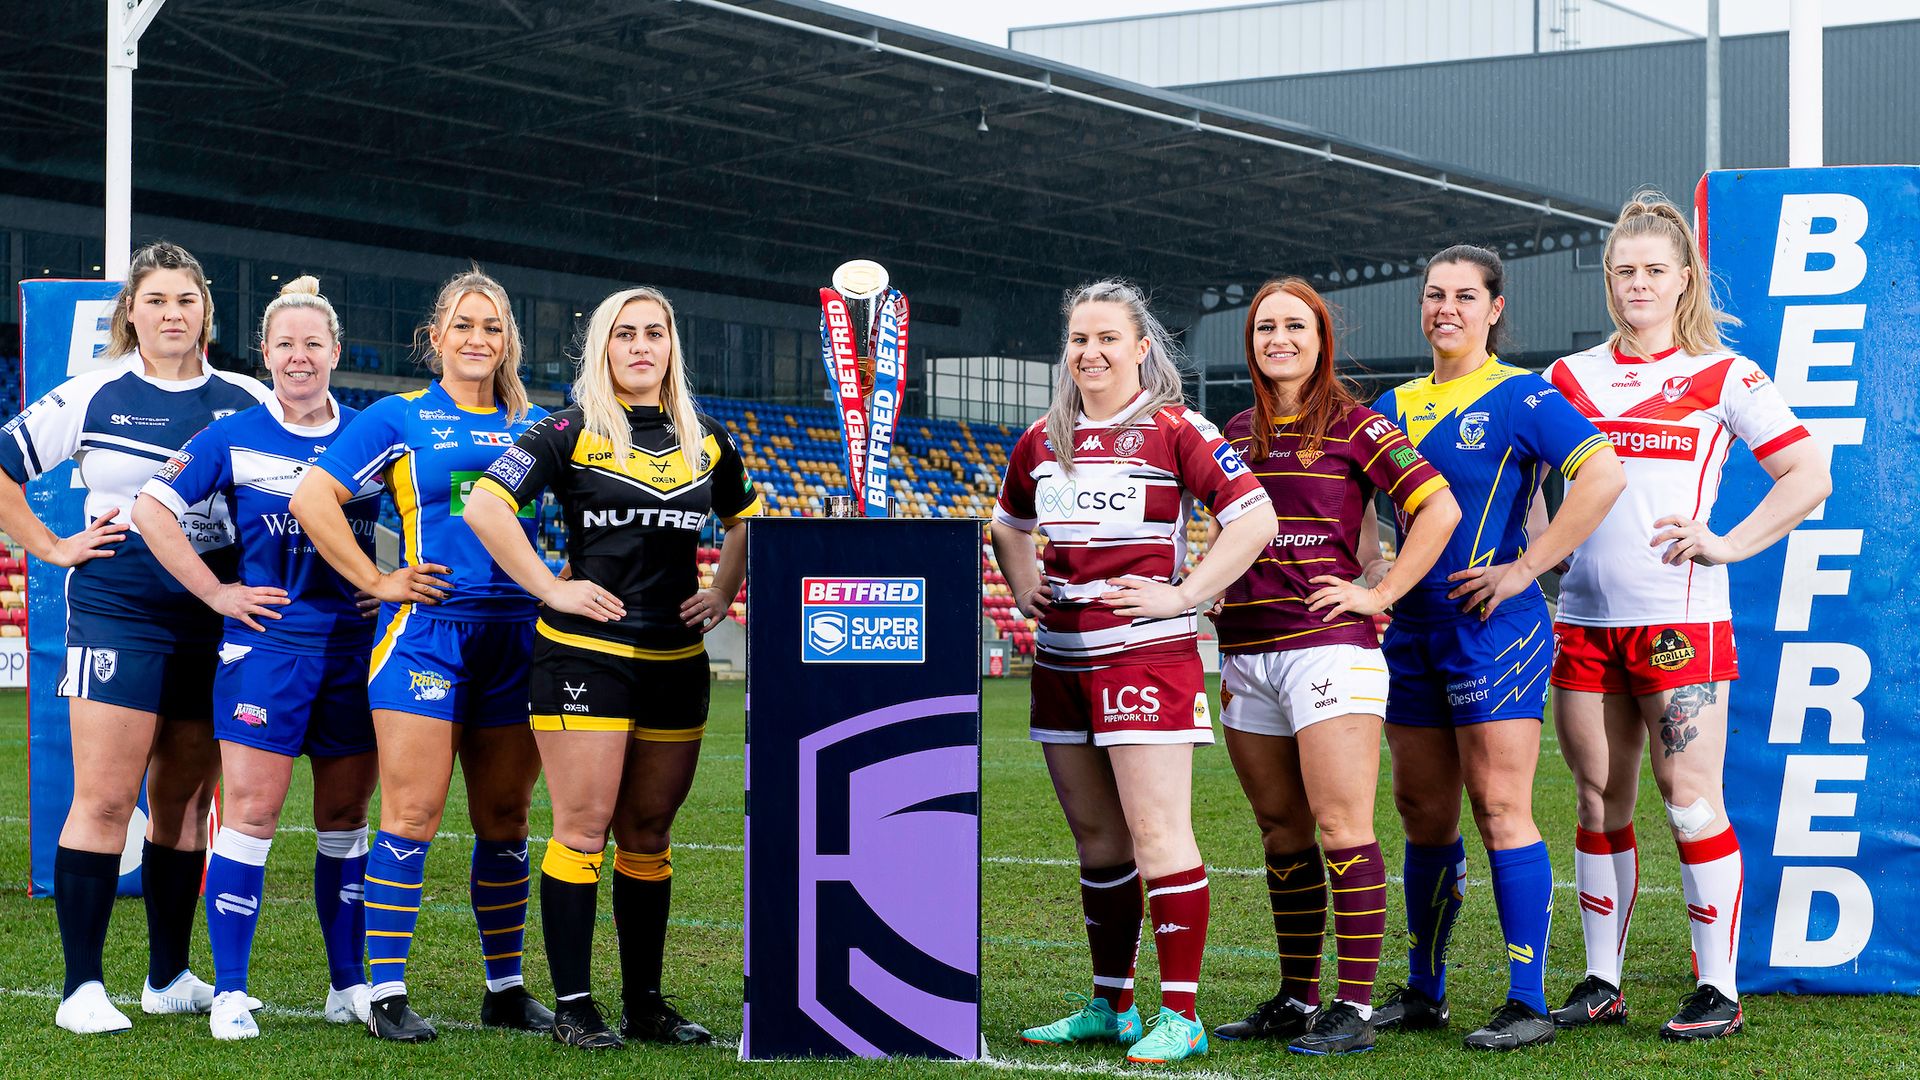 Women's Super League on Sky Sports, starting with St Helens vs Leeds Rhinos